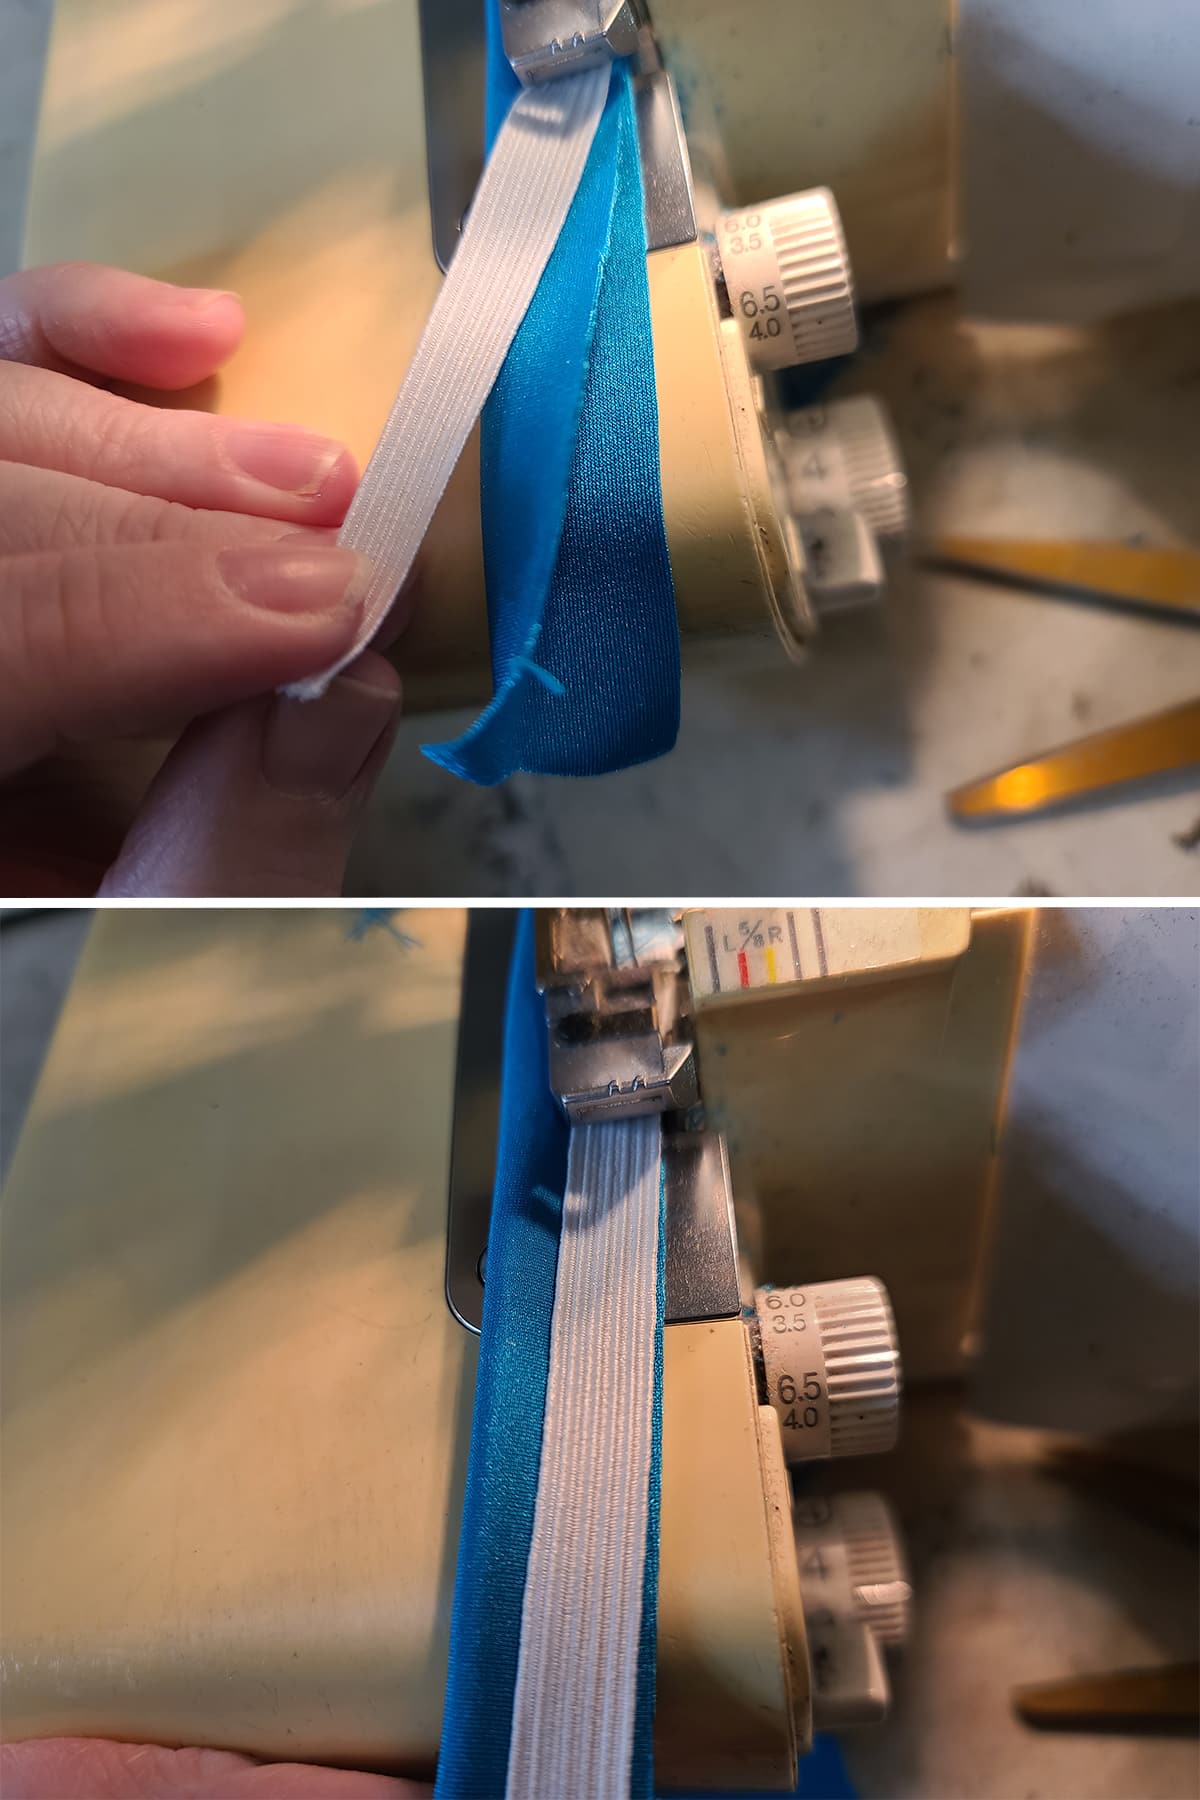 The blue spandex folded in half, elastic being stitched down to it.